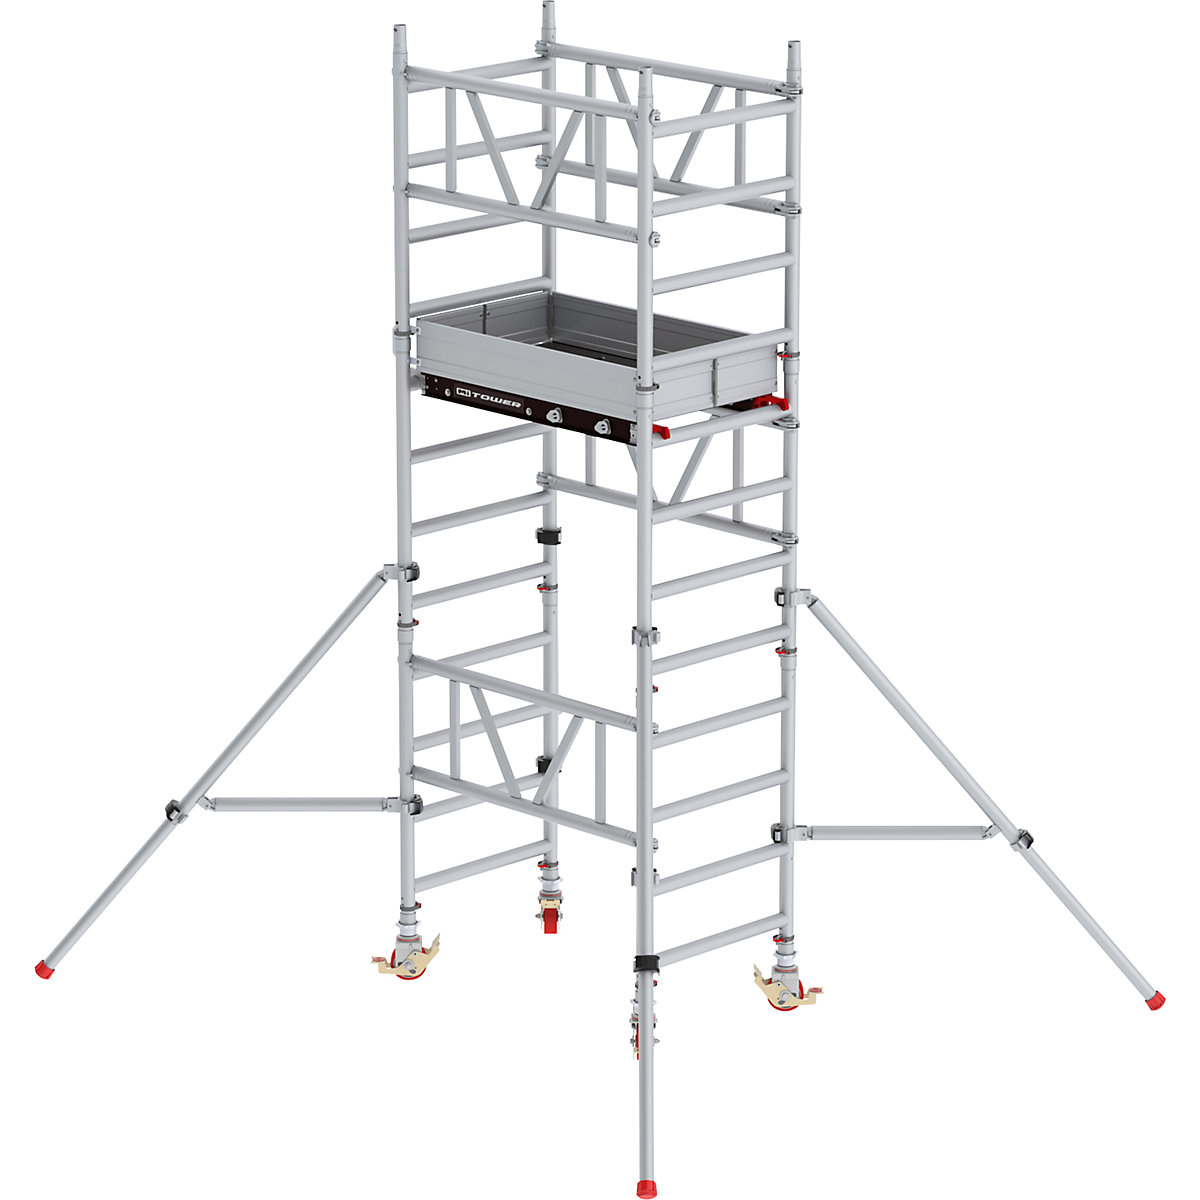 Standard MiTOWER quick assembly mobile access tower - Altrex